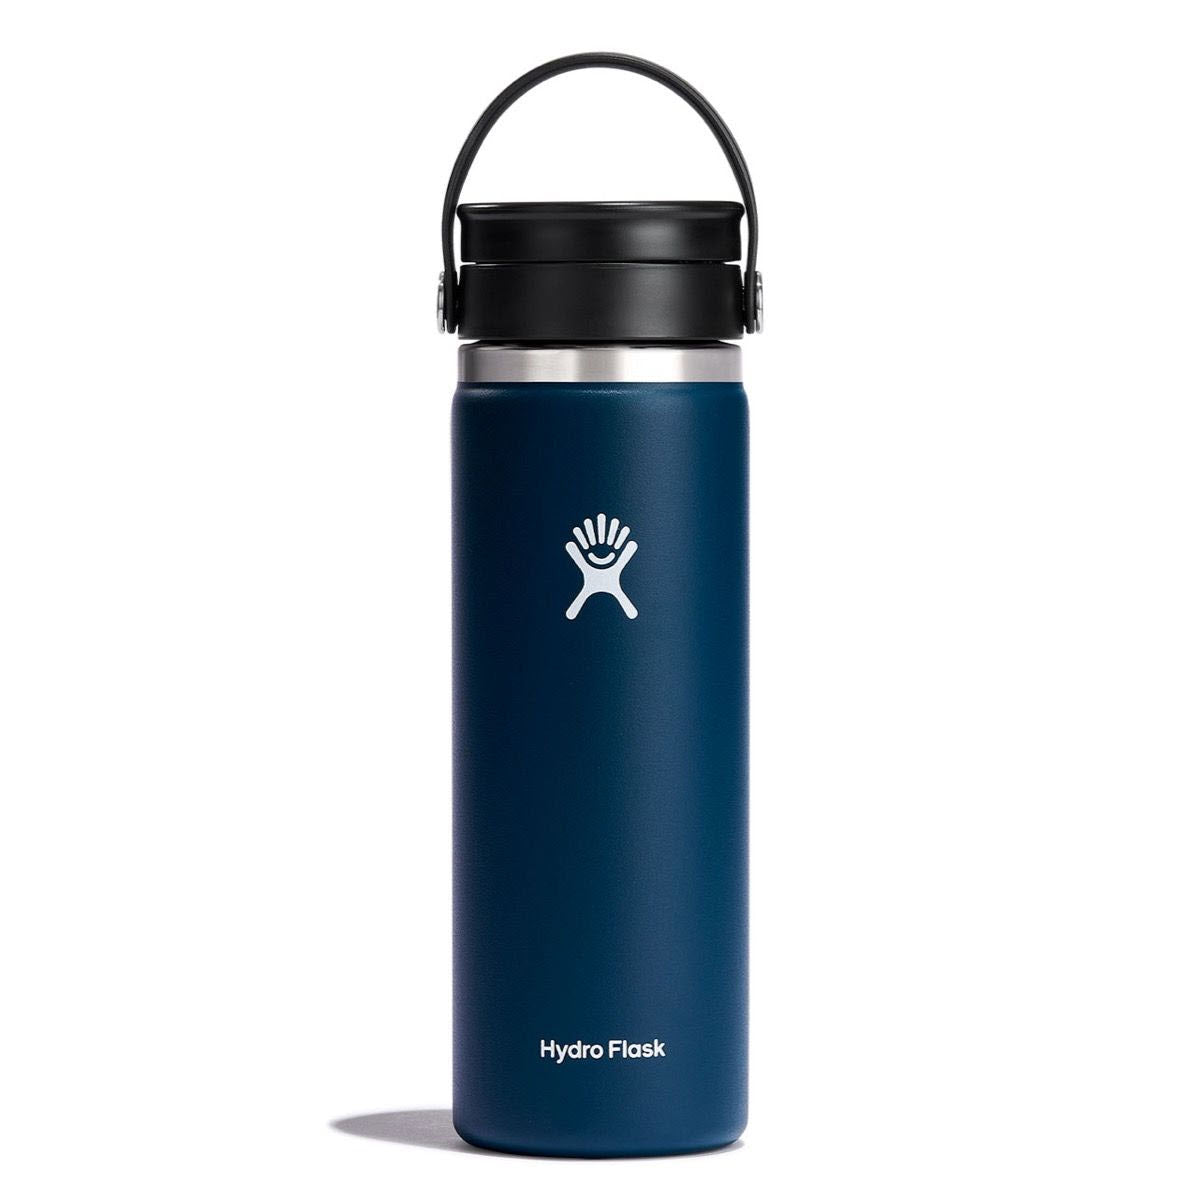 A Hydro Flask Wide Mouth Coffee 20oz Indigo with a Flex Sip Lid and handle, featuring the brand's white logo on the front.